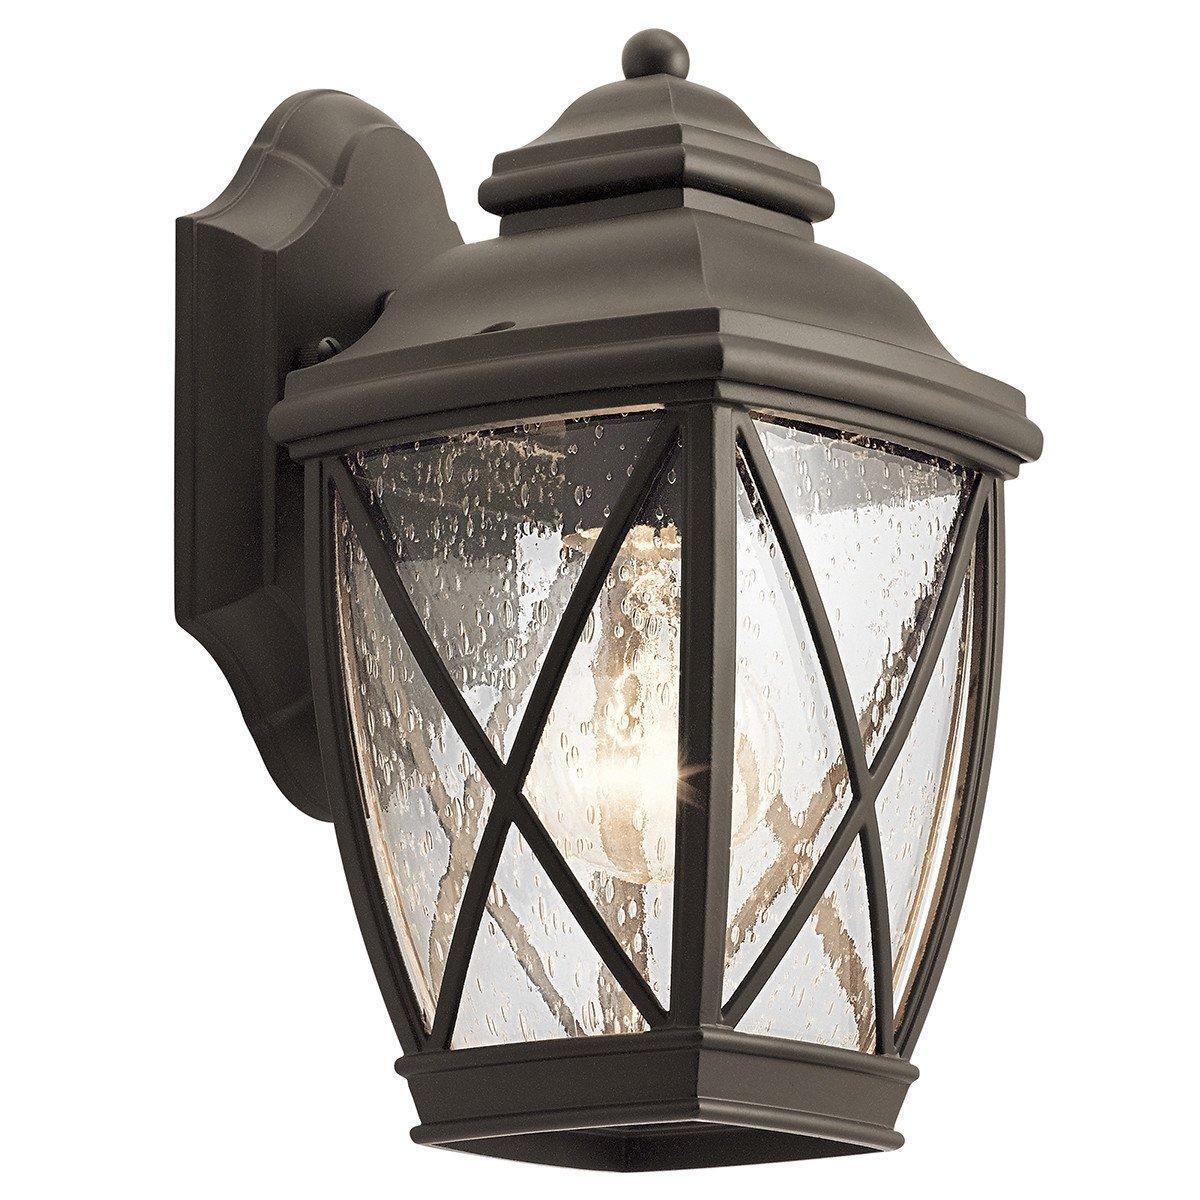 Tangier Small Outdoor Wall Lantern Olde Bronze IP44 - image 1